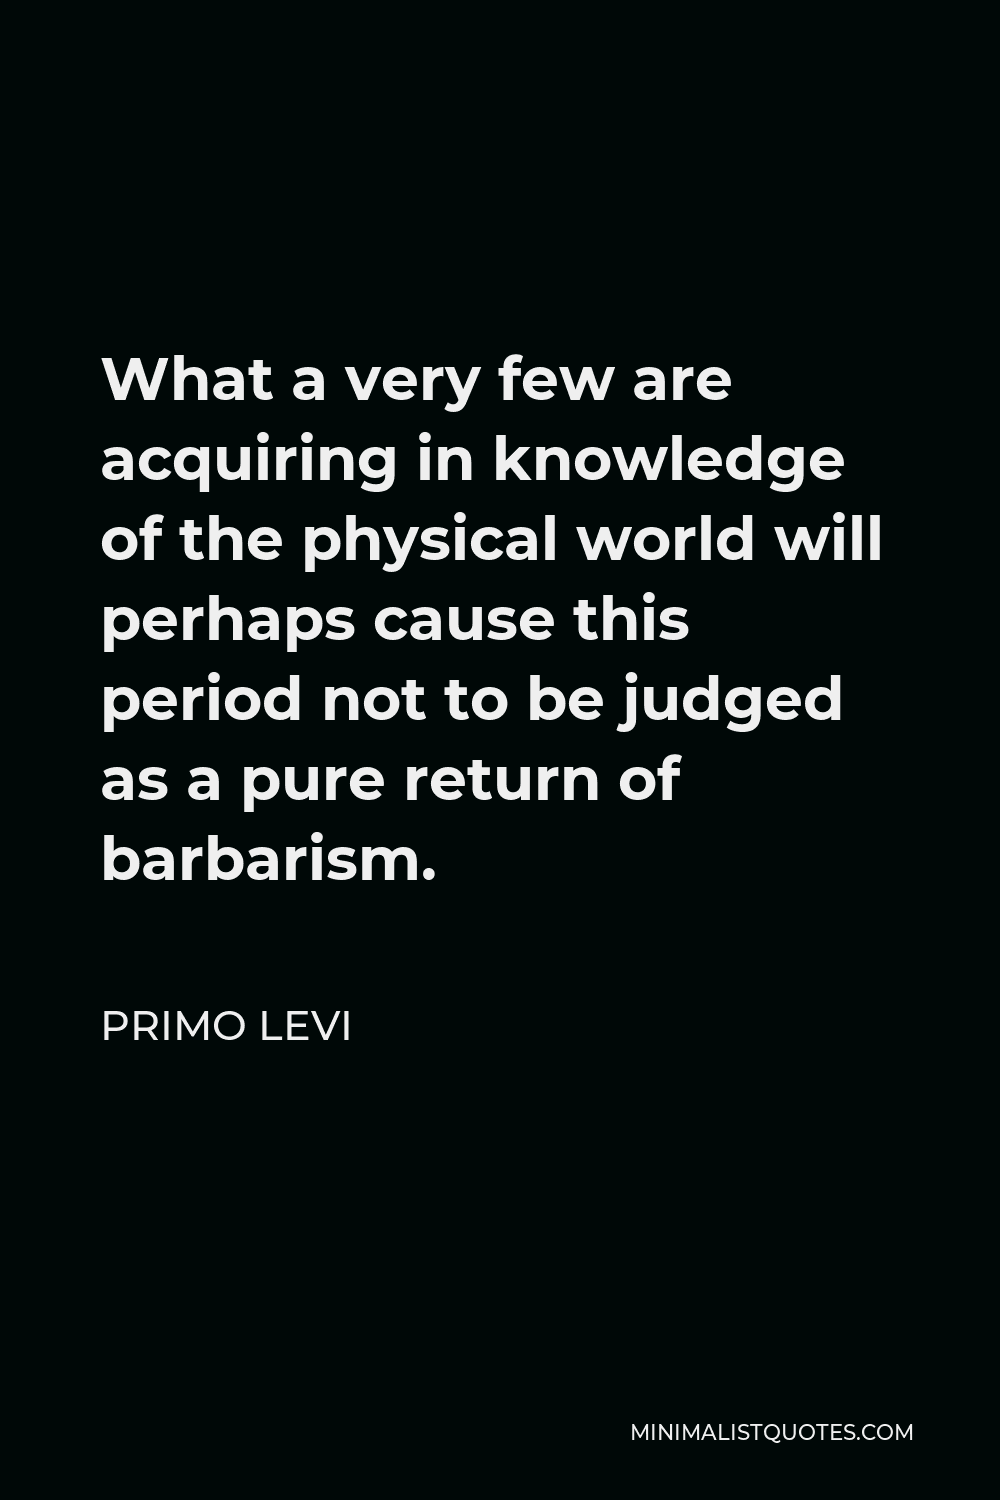 Primo Levi Quote - What a very few are acquiring in knowledge of the physical world will perhaps cause this period not to be judged as a pure return of barbarism.